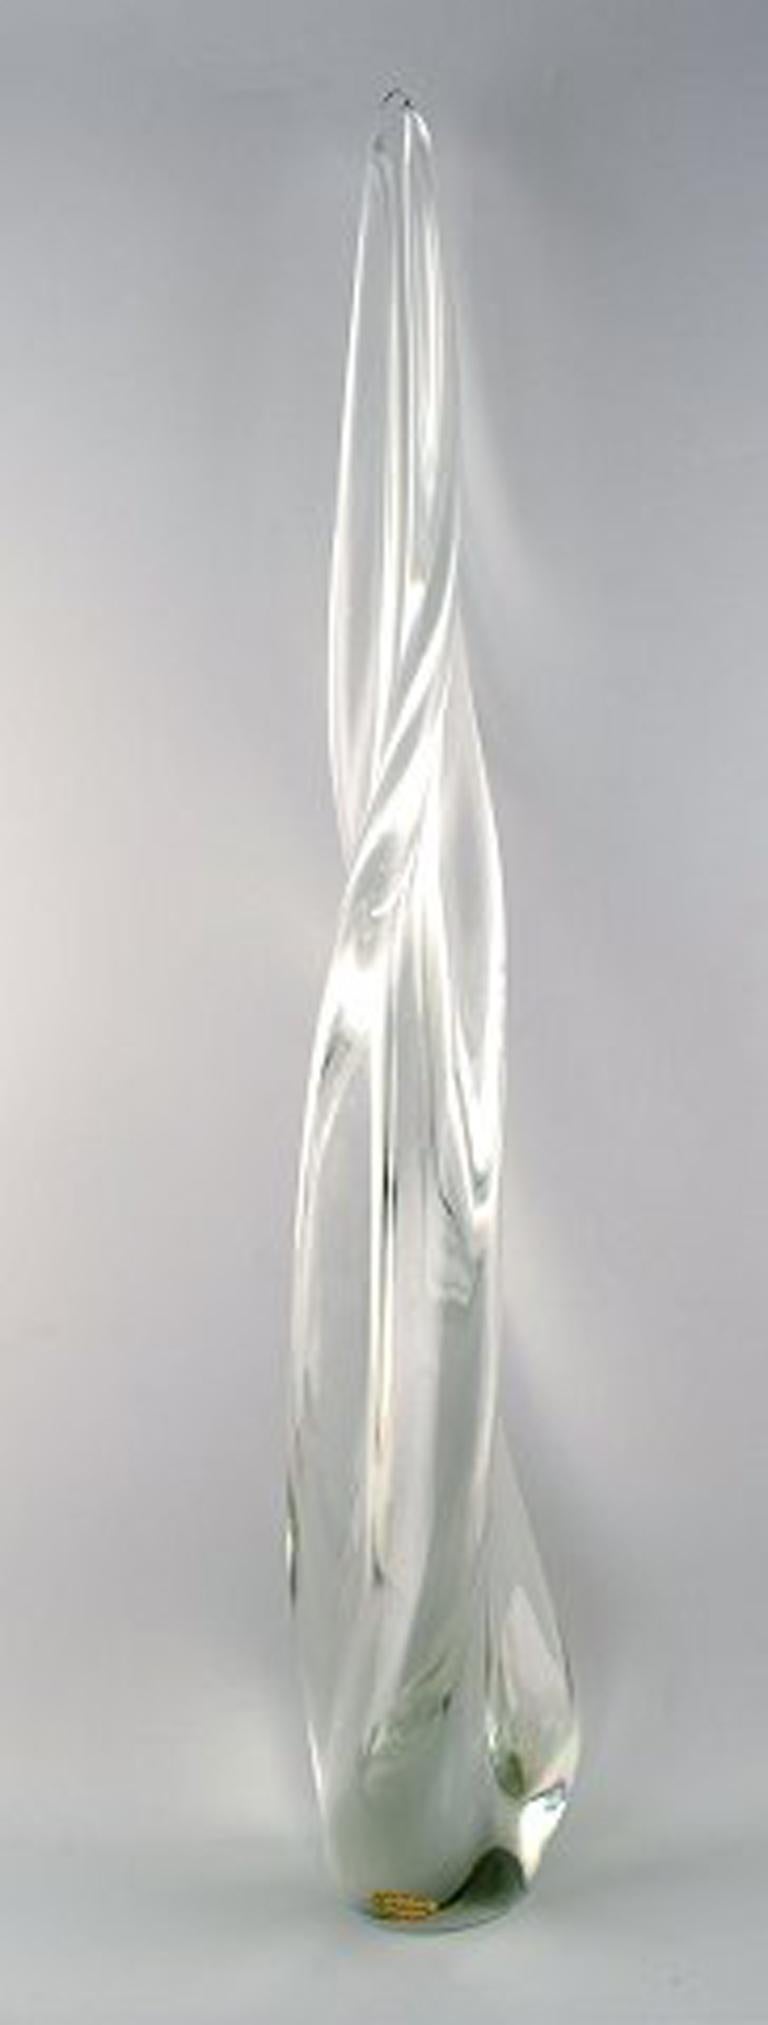 Colossal art glass sculpture in crystal by K. Jablonski, Poland, 1980s.
In very good condition.
Sticker.
Measures: 90 cm x 16 cm.